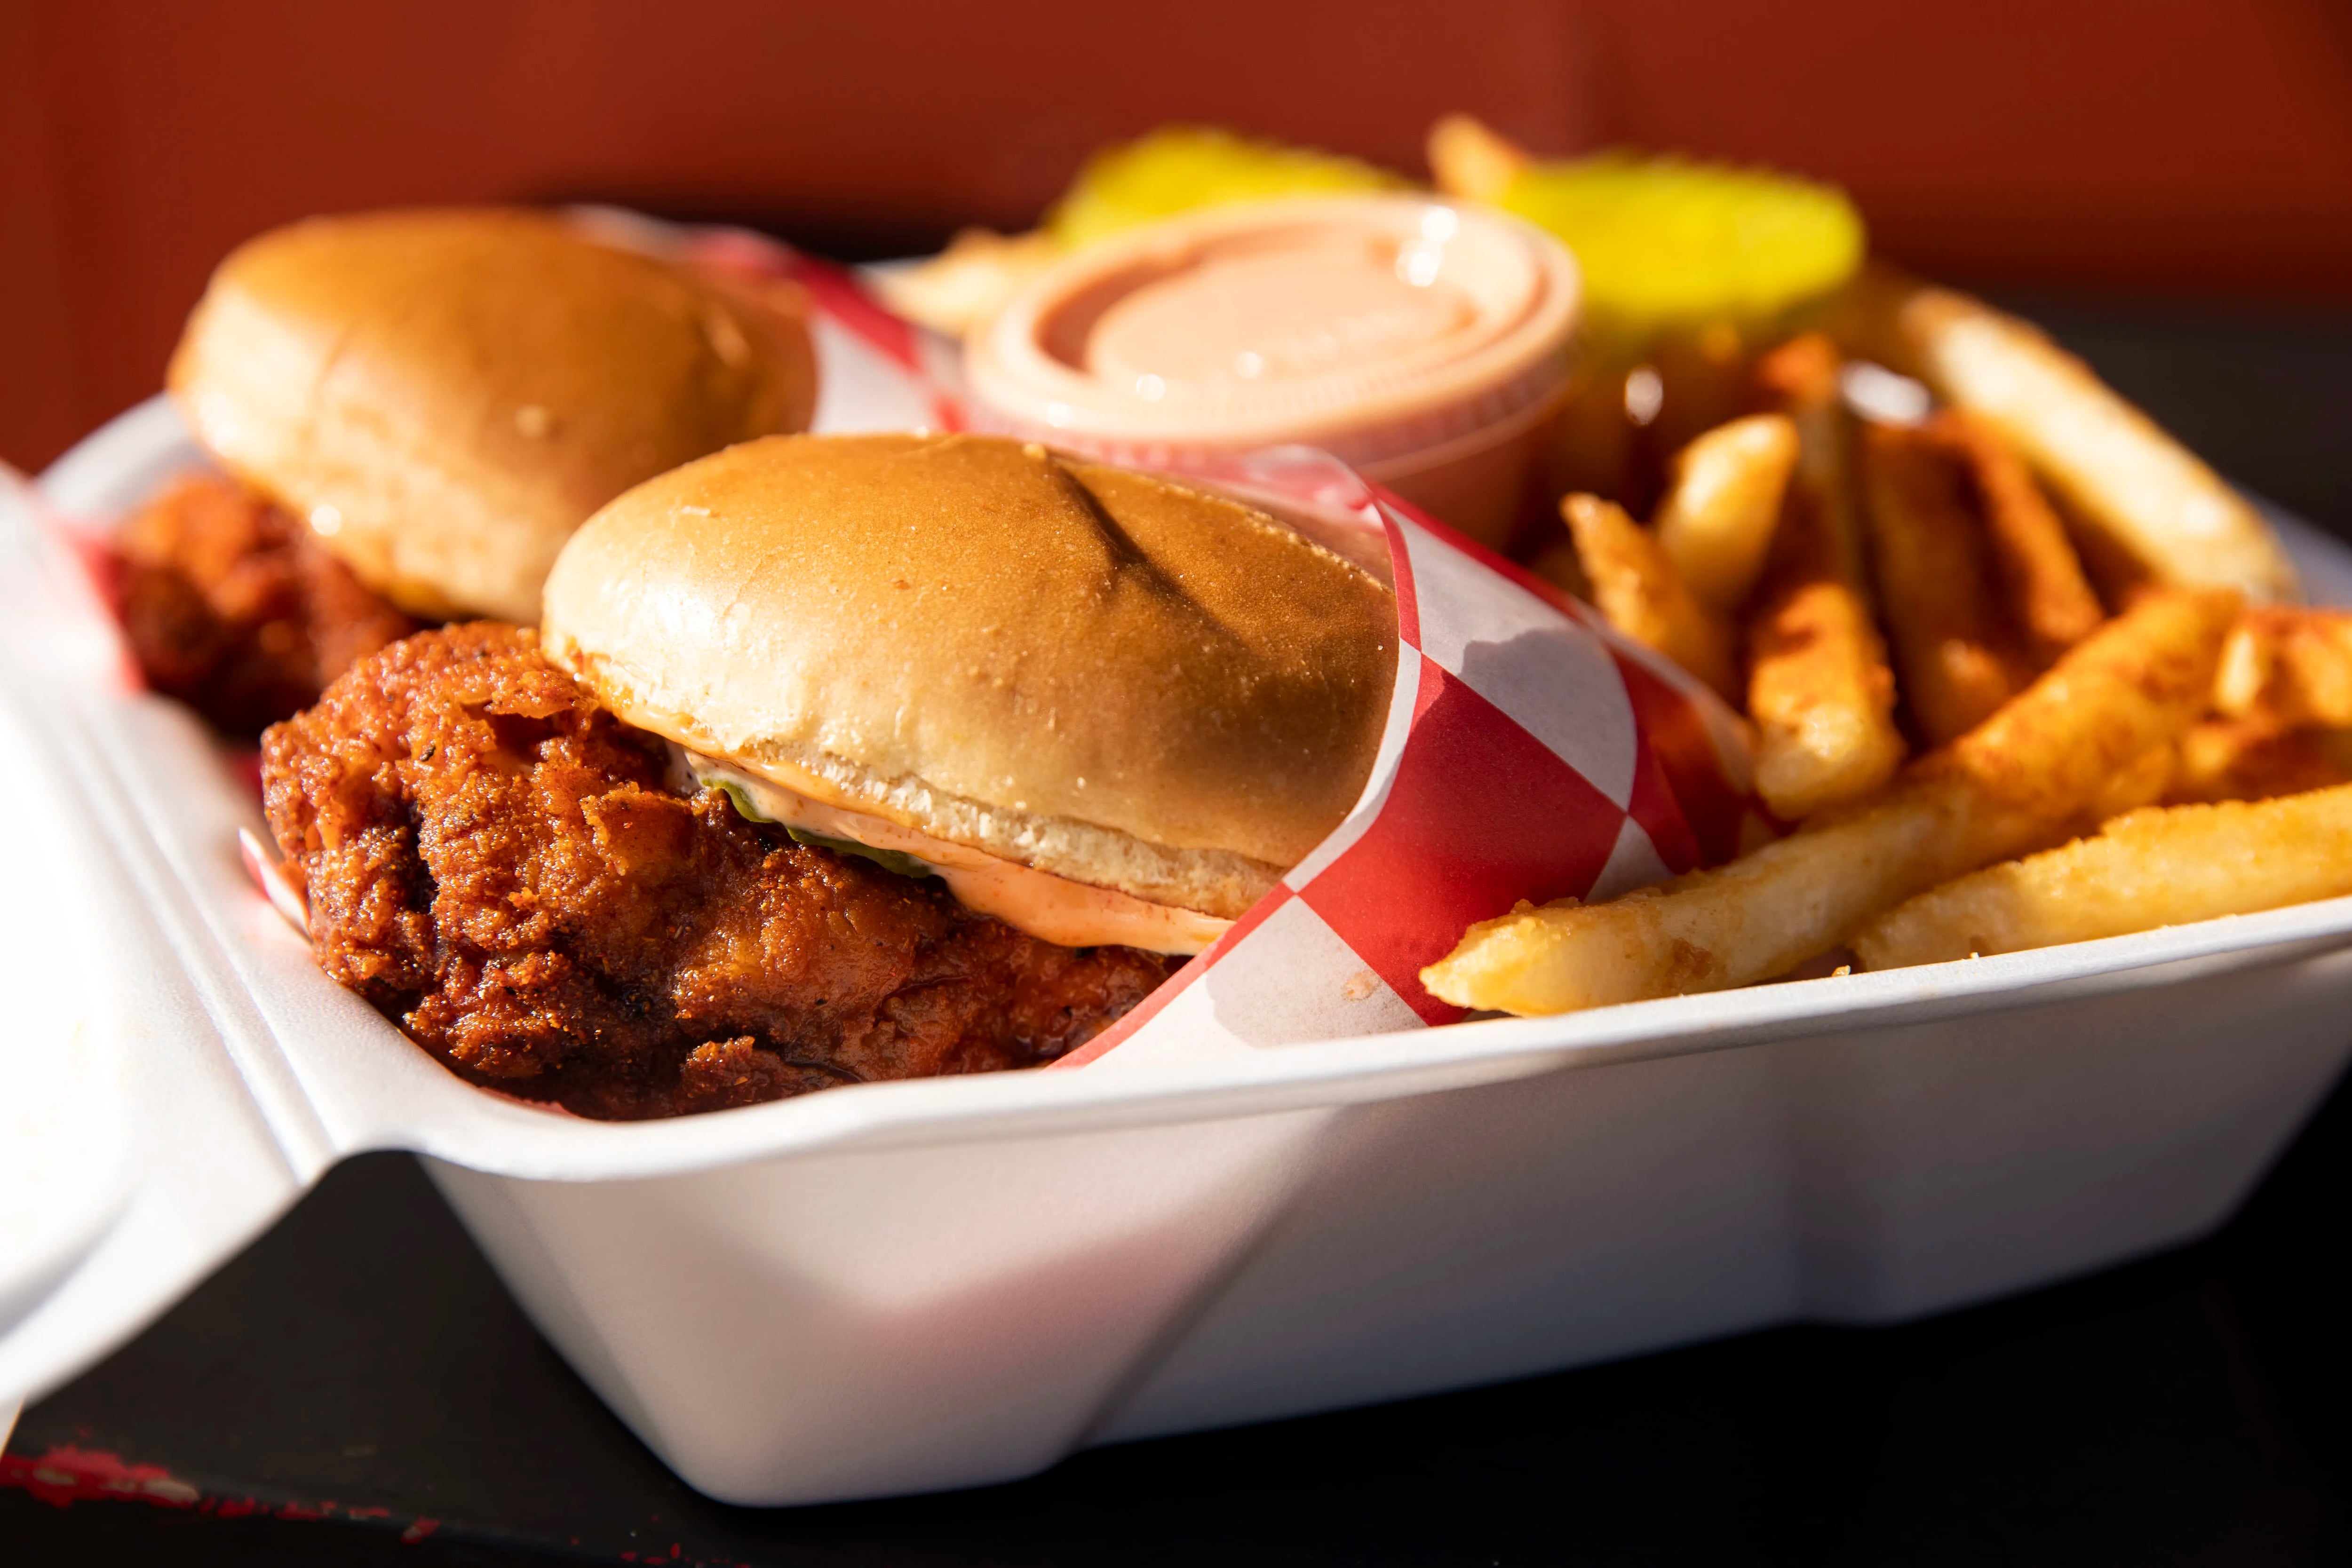 Hot chicken sandwiches with fries at Asad’s Hot Chicken in Philadelphia.